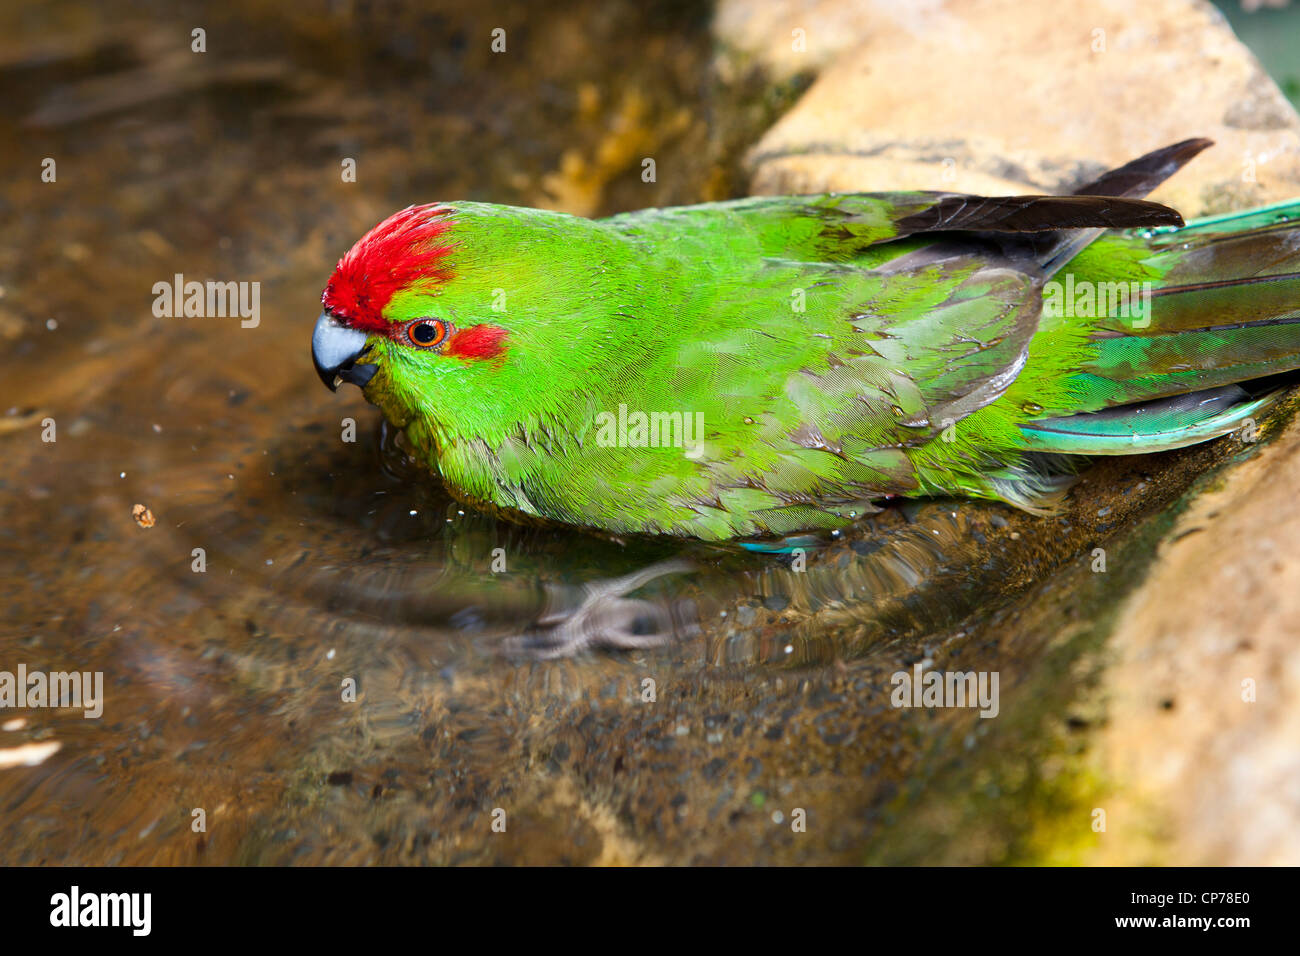 A small green bird with red on its head and around eyes, in a bird bath at Butterfly World, Klapmuts, South Africa Stock Photo